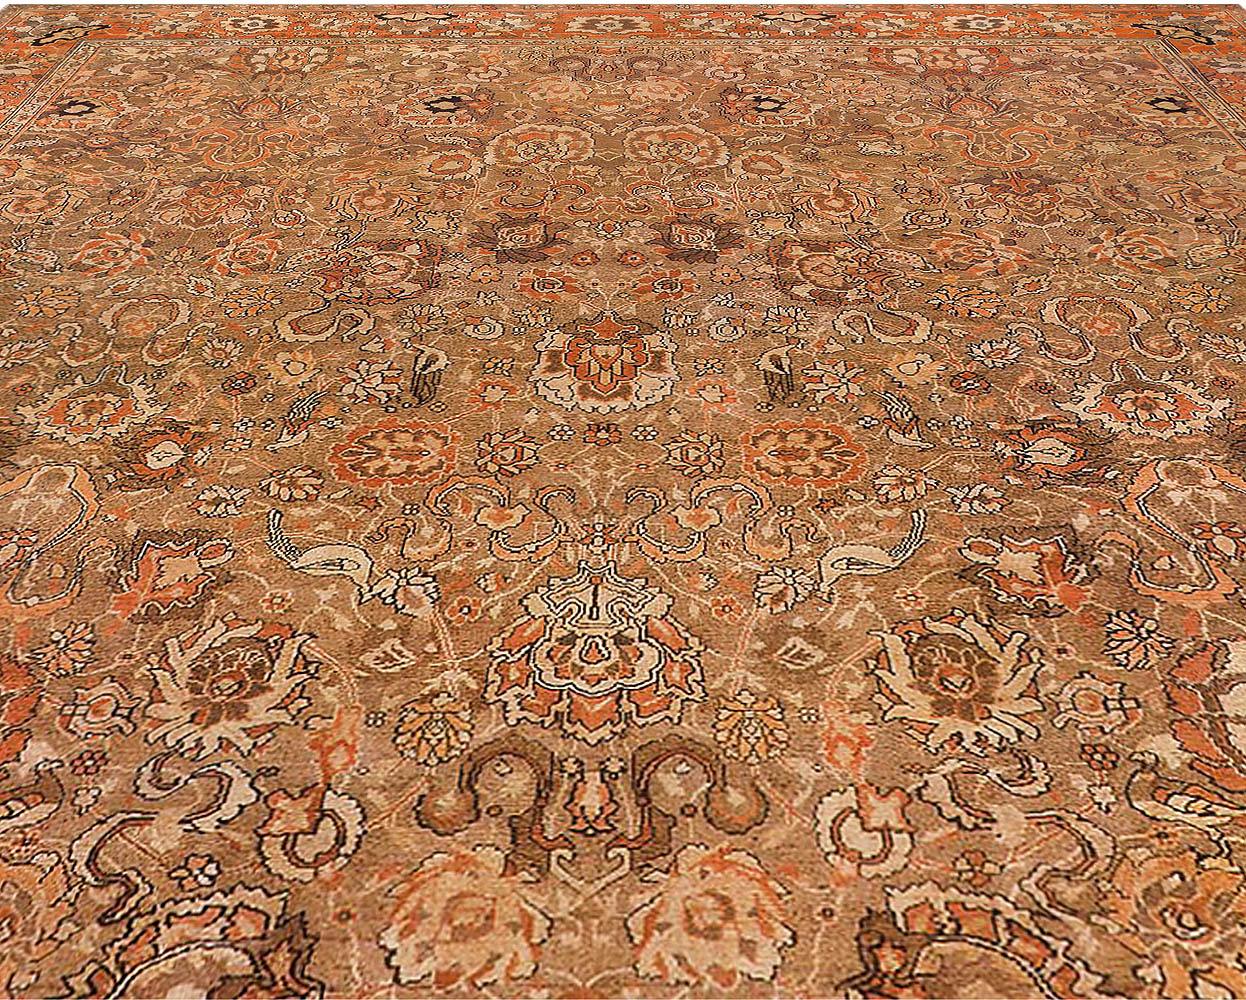 19th century Indian Amritsar brown, beige and salmon wool rug
Size: 13'9